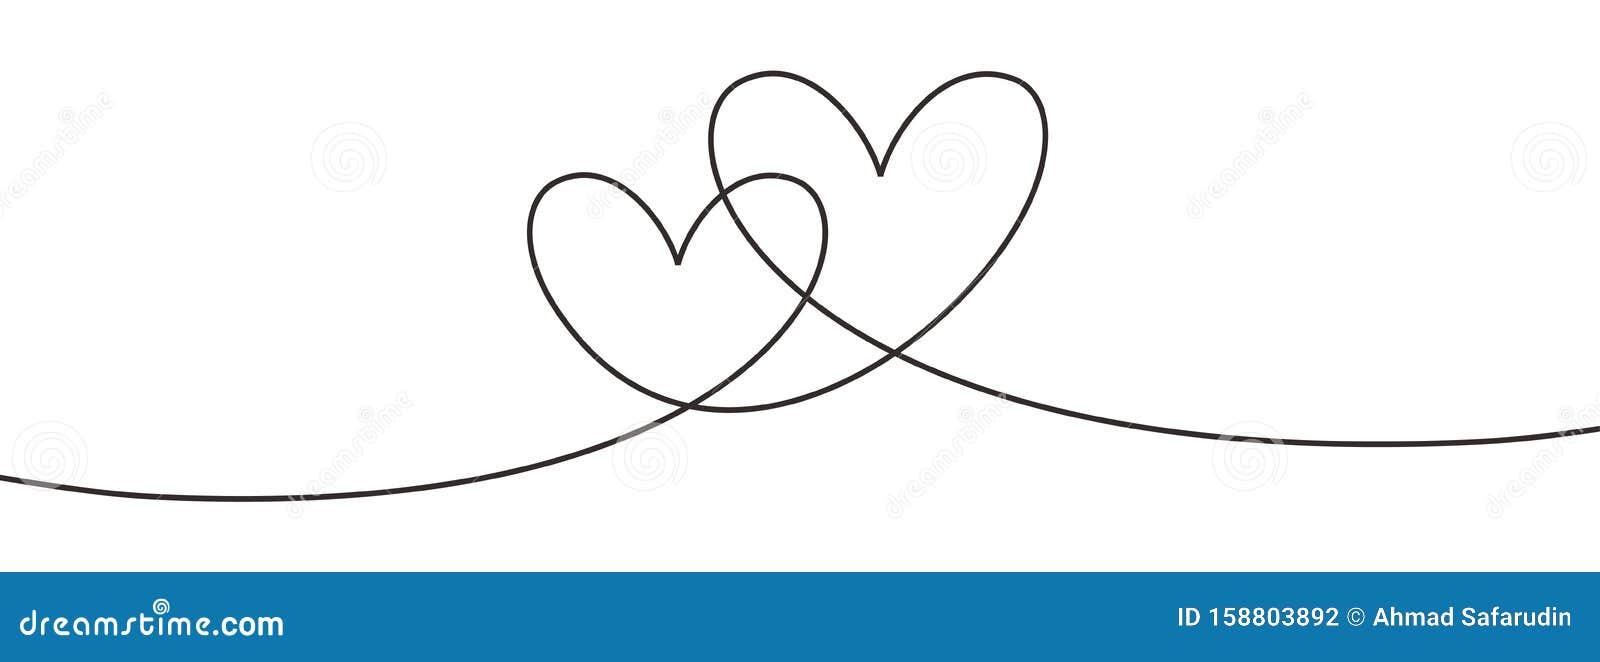 continuous line drawing two hearts embracing, black and white  minimalist  of love concept minimalism one hand